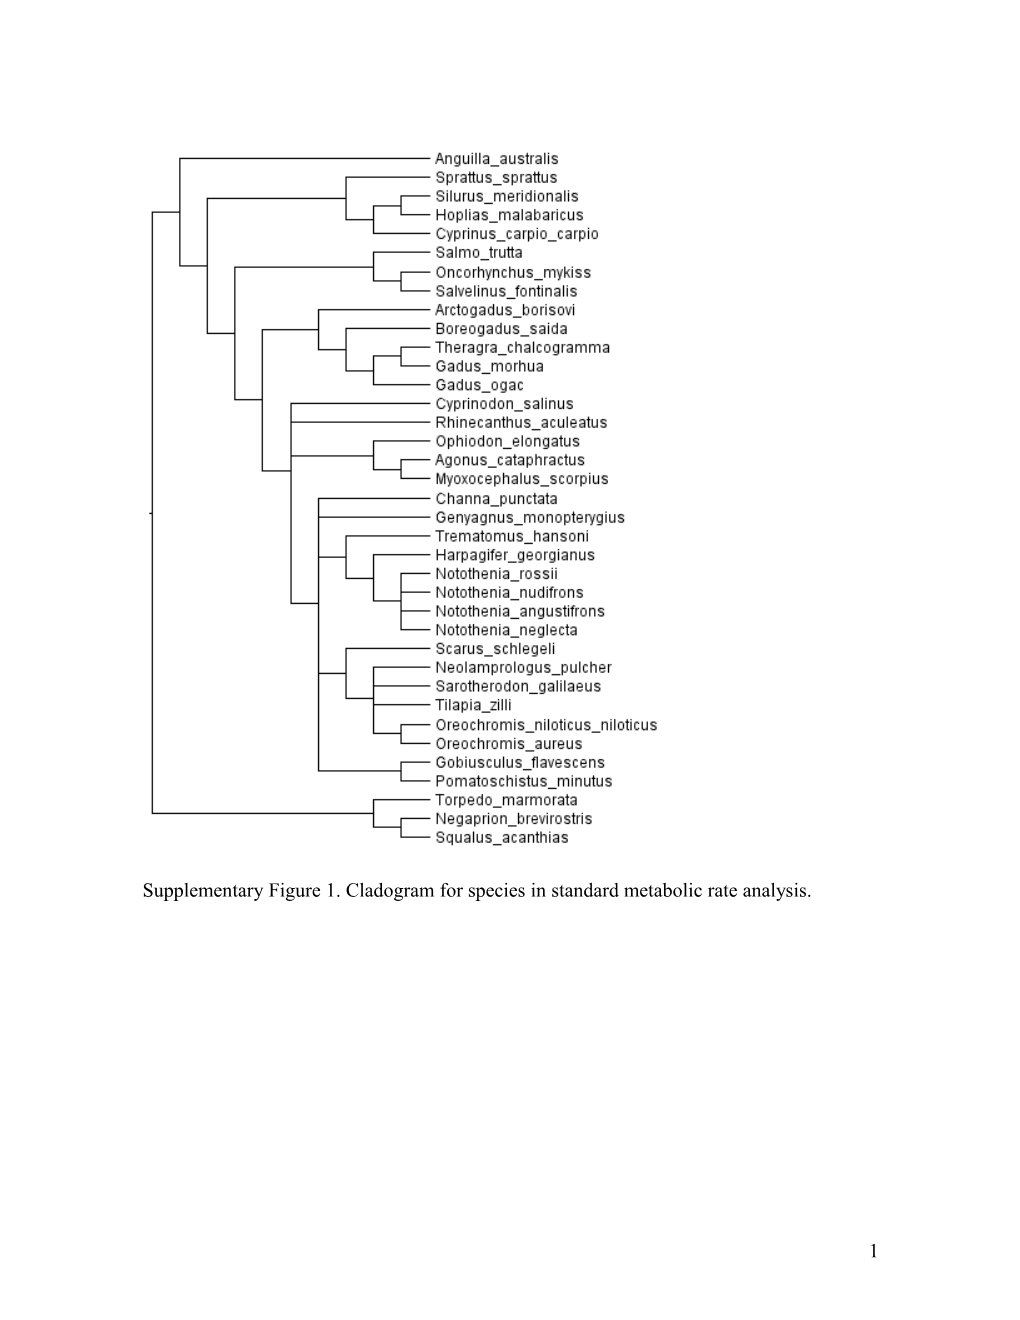 Supplementary Figure 1. Cladogram for Species in Standard Metabolic Rate Analysis